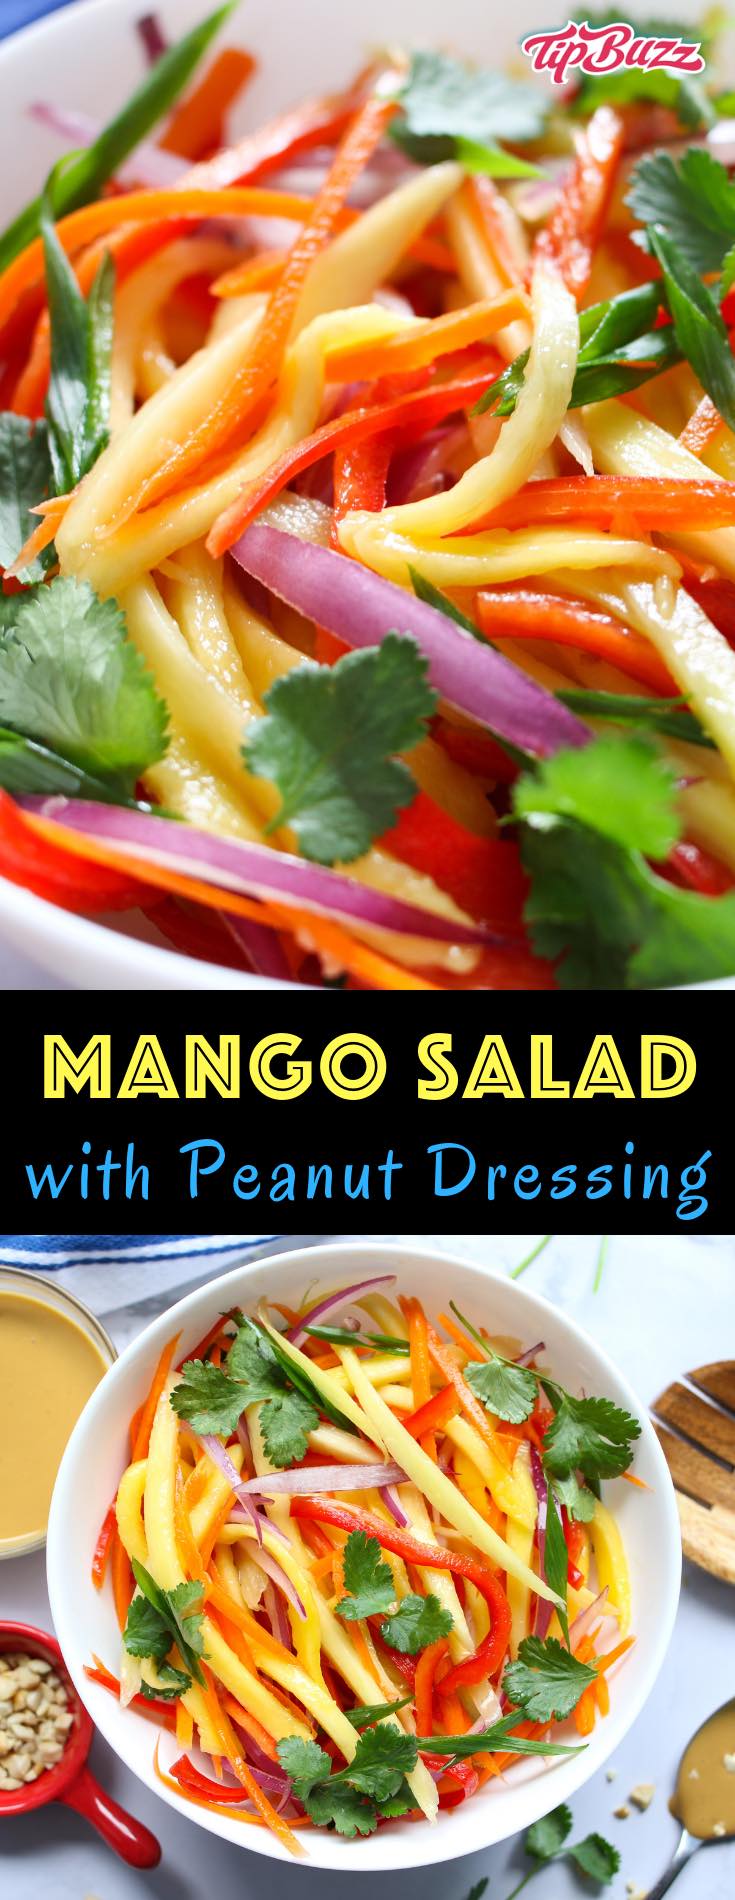 Mango Salad is a quick summer salad recipe that everyone always loves! A rich and creamy Peanut Dressing is tossed with fresh mango, carrots, red bell pepper, red onions and crunchy peanuts to give you the most refreshing salad!